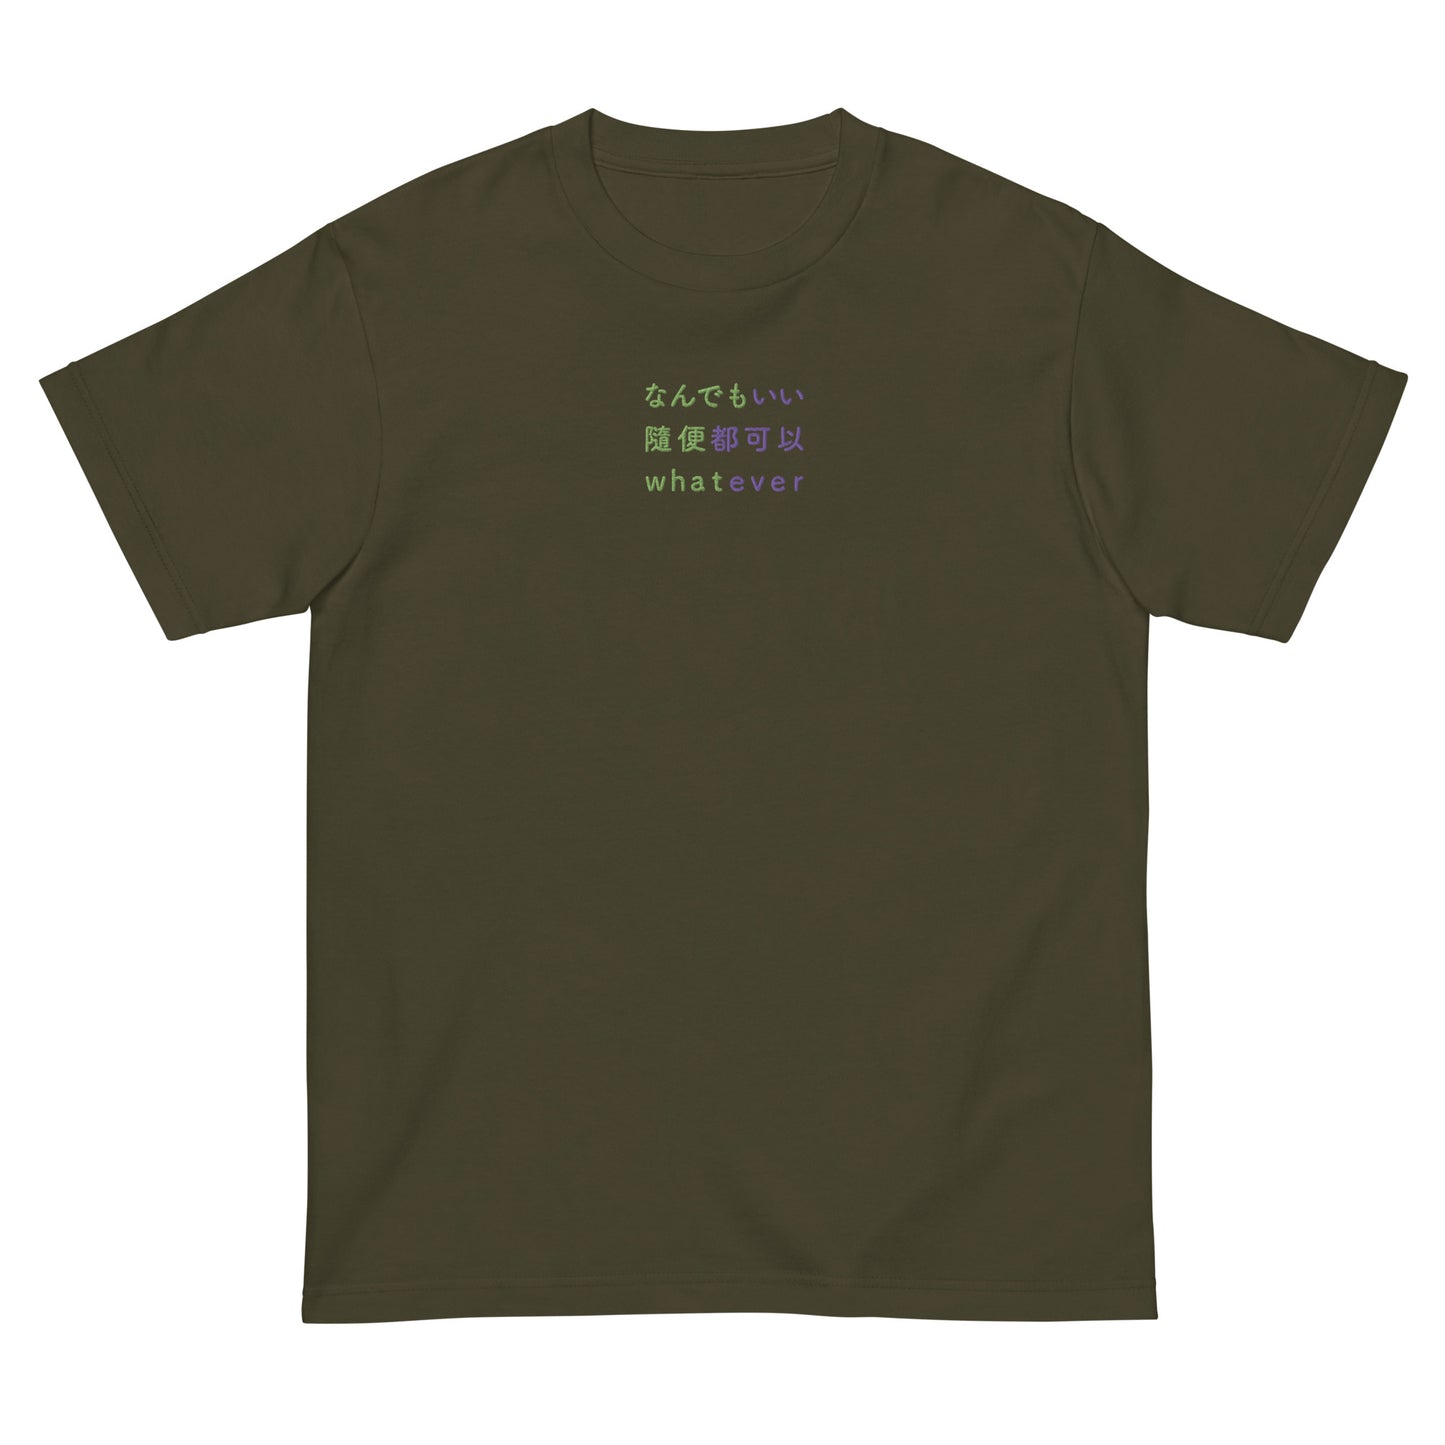 Green High Quality Tee - Front Design with an Green,Purple Embroidery "Whatever" in Japanese,Chinese and English